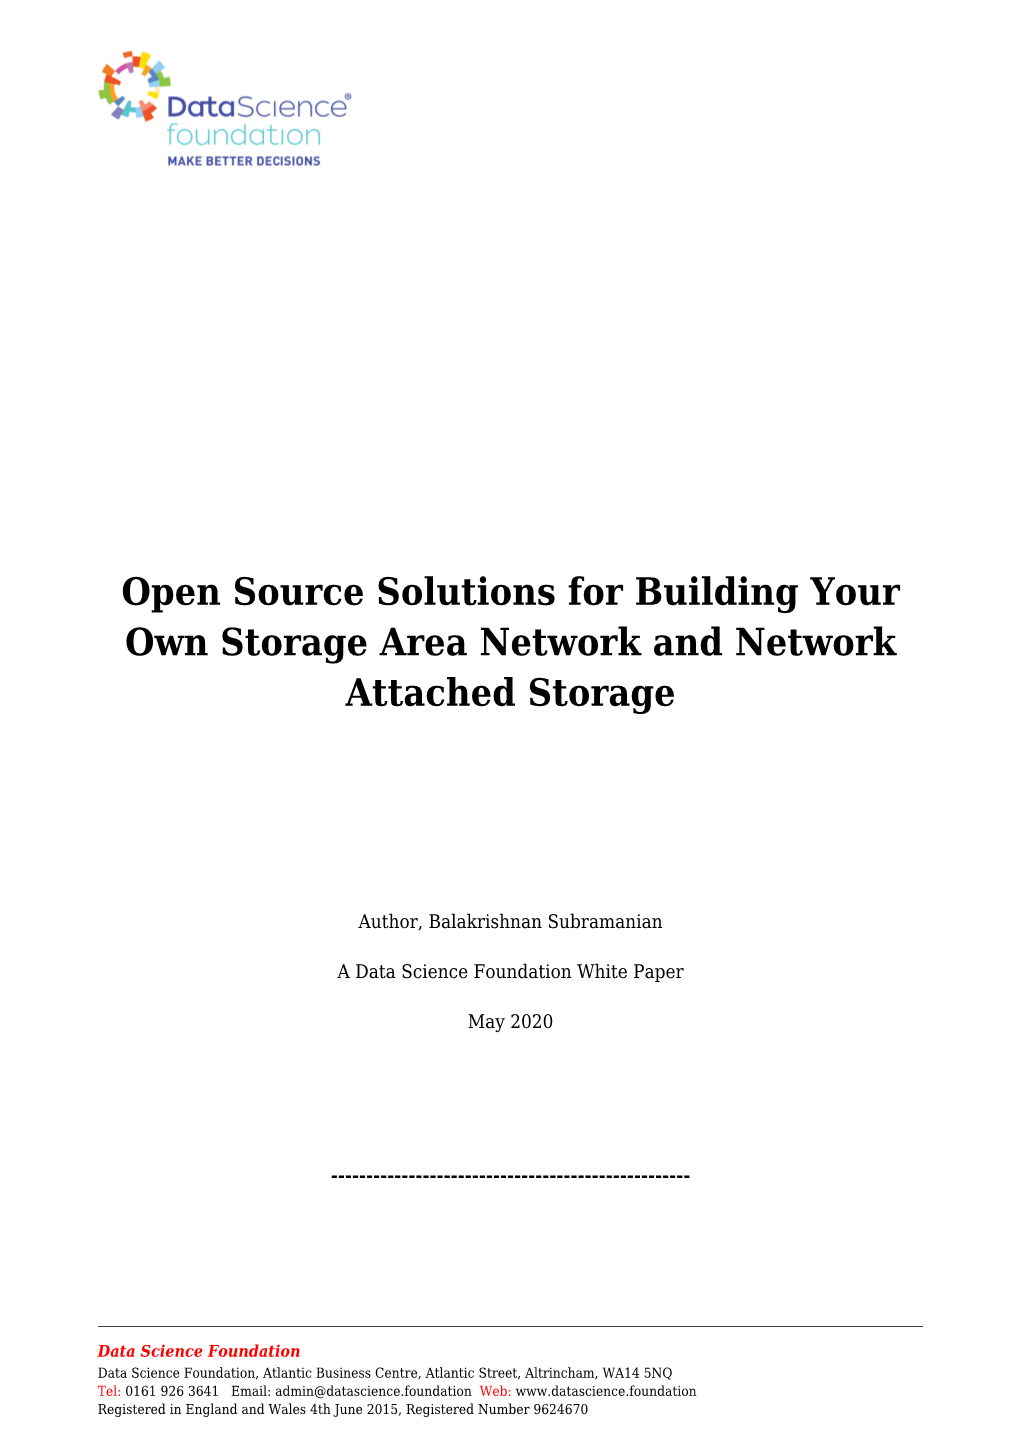 Open Source Solutions for Building Your Own Storage Area Network and Network Attached Storage